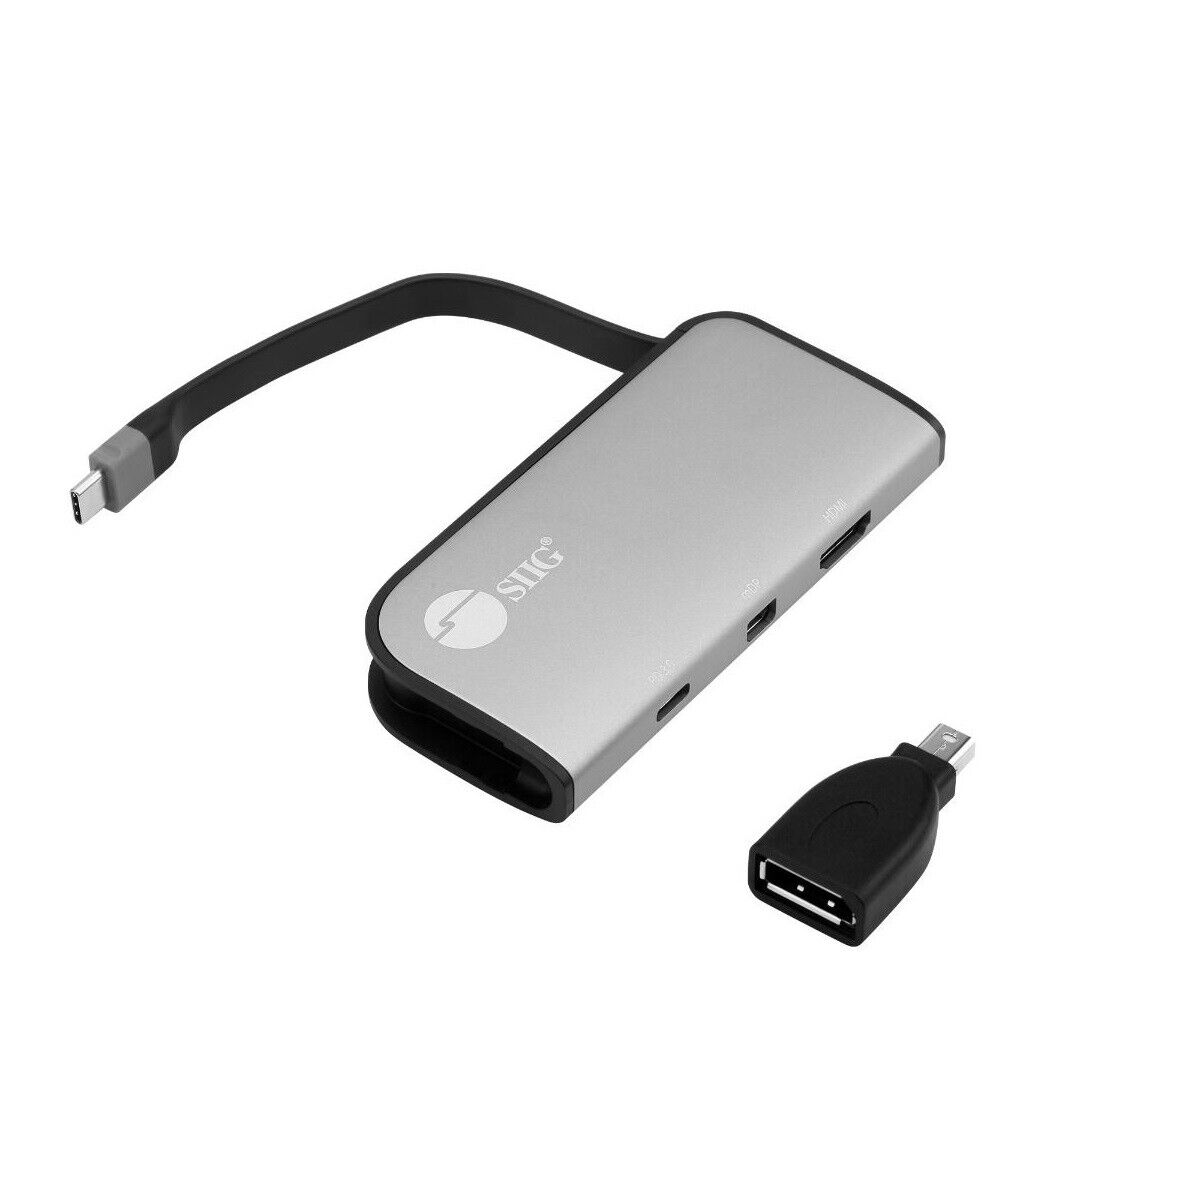 SIIG USB-C to mDP & HDMI VXP Video Adapter with PD 3.0